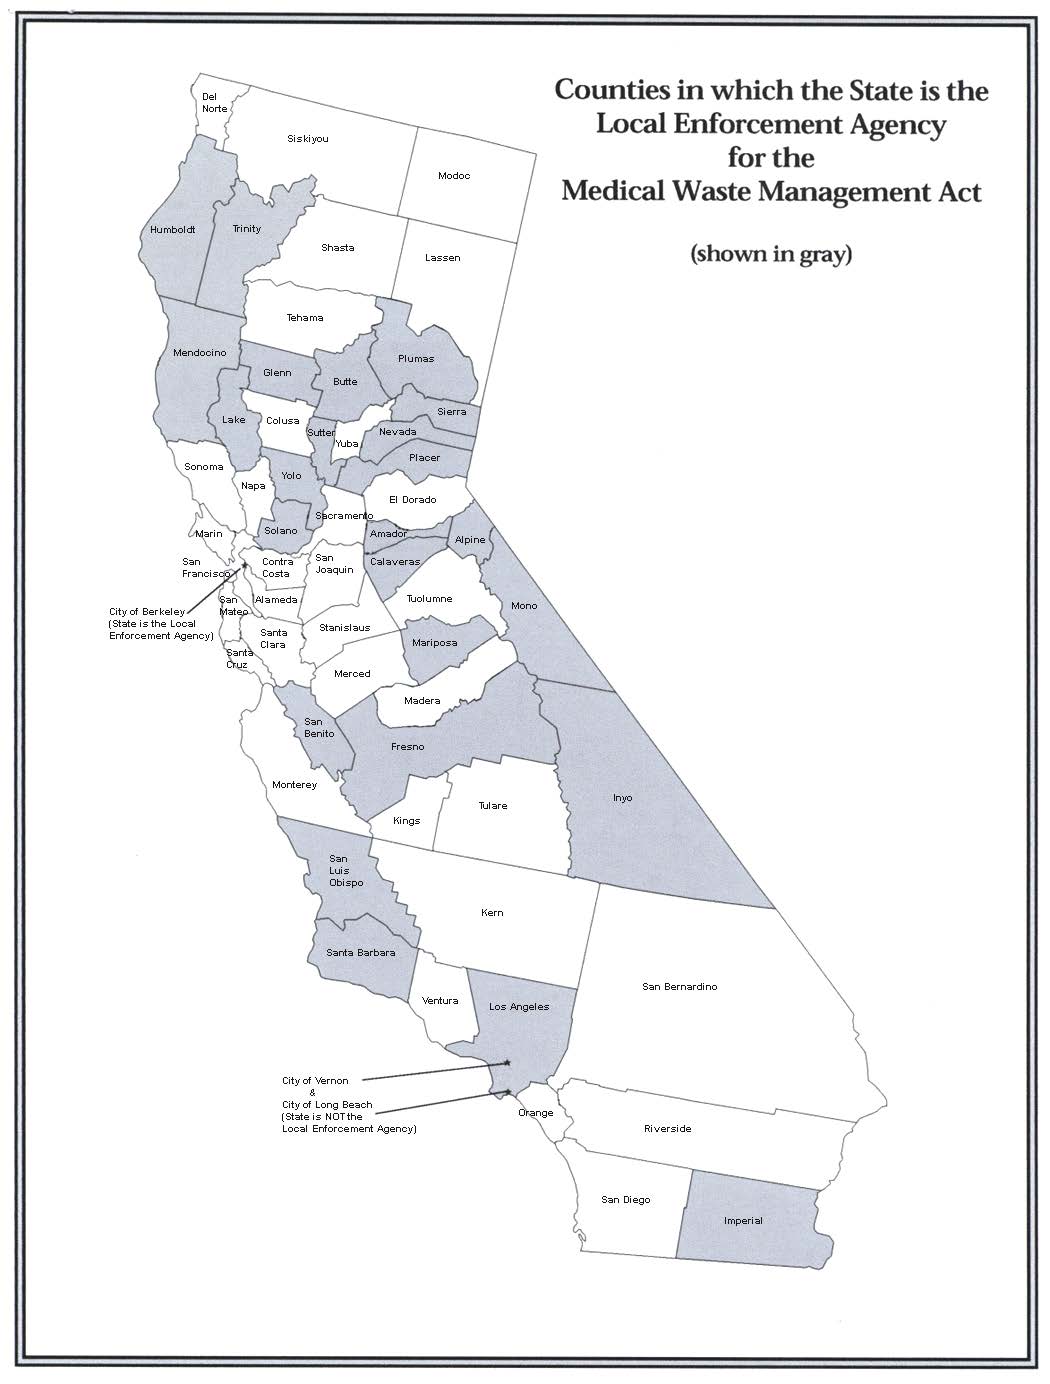 The map shows the State andLocal Enforcement Agency jurisdictions